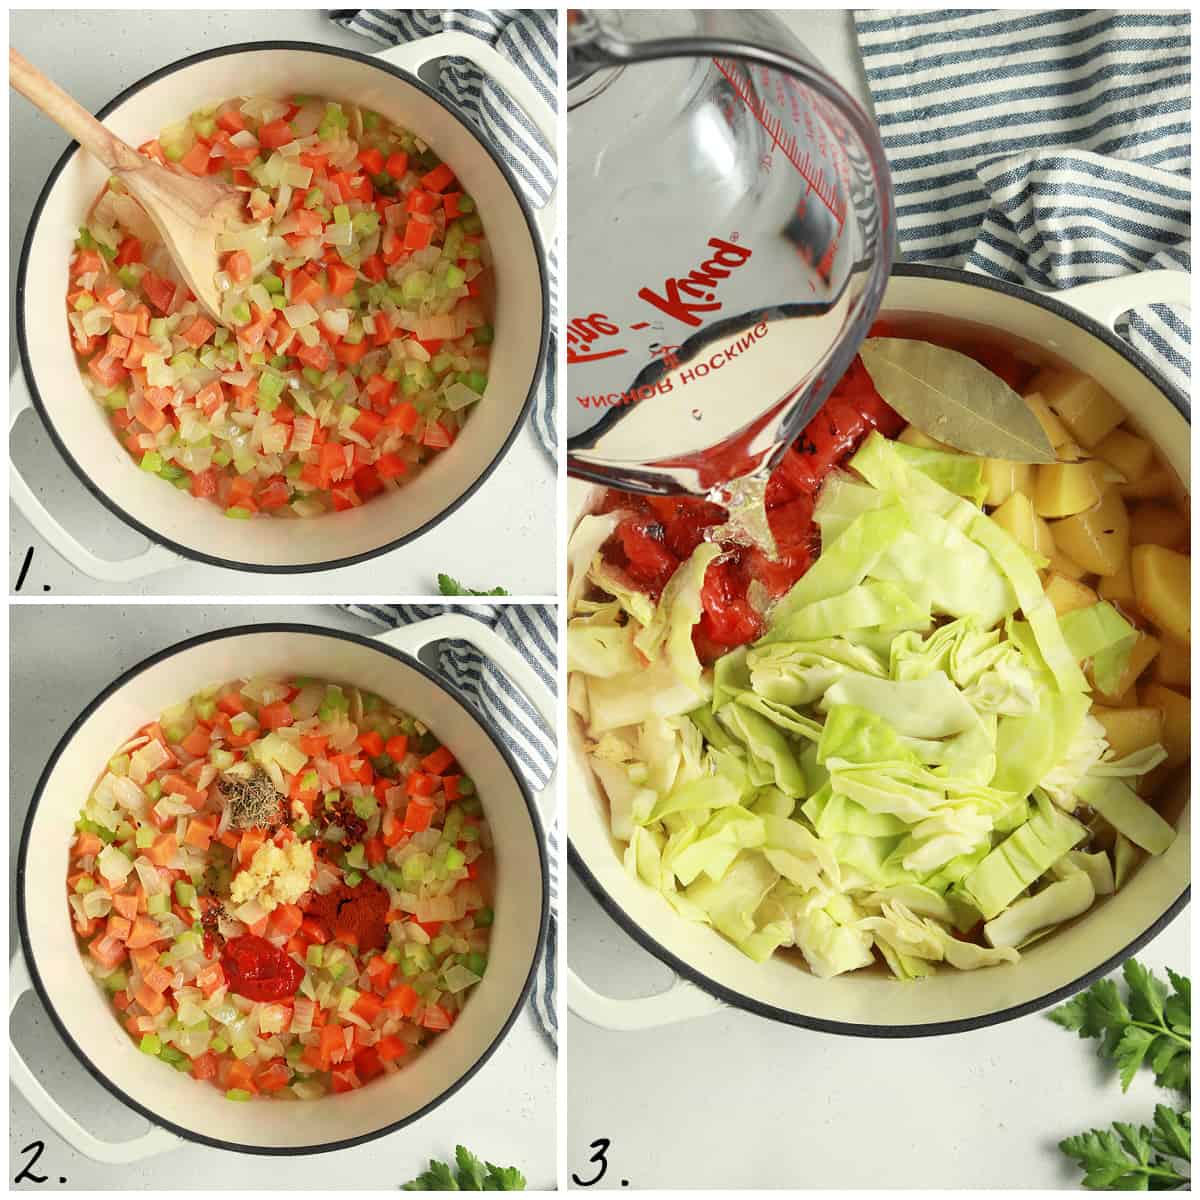 3 process photos of sautéing vegetables, adding spices, then remaining ingredients. 